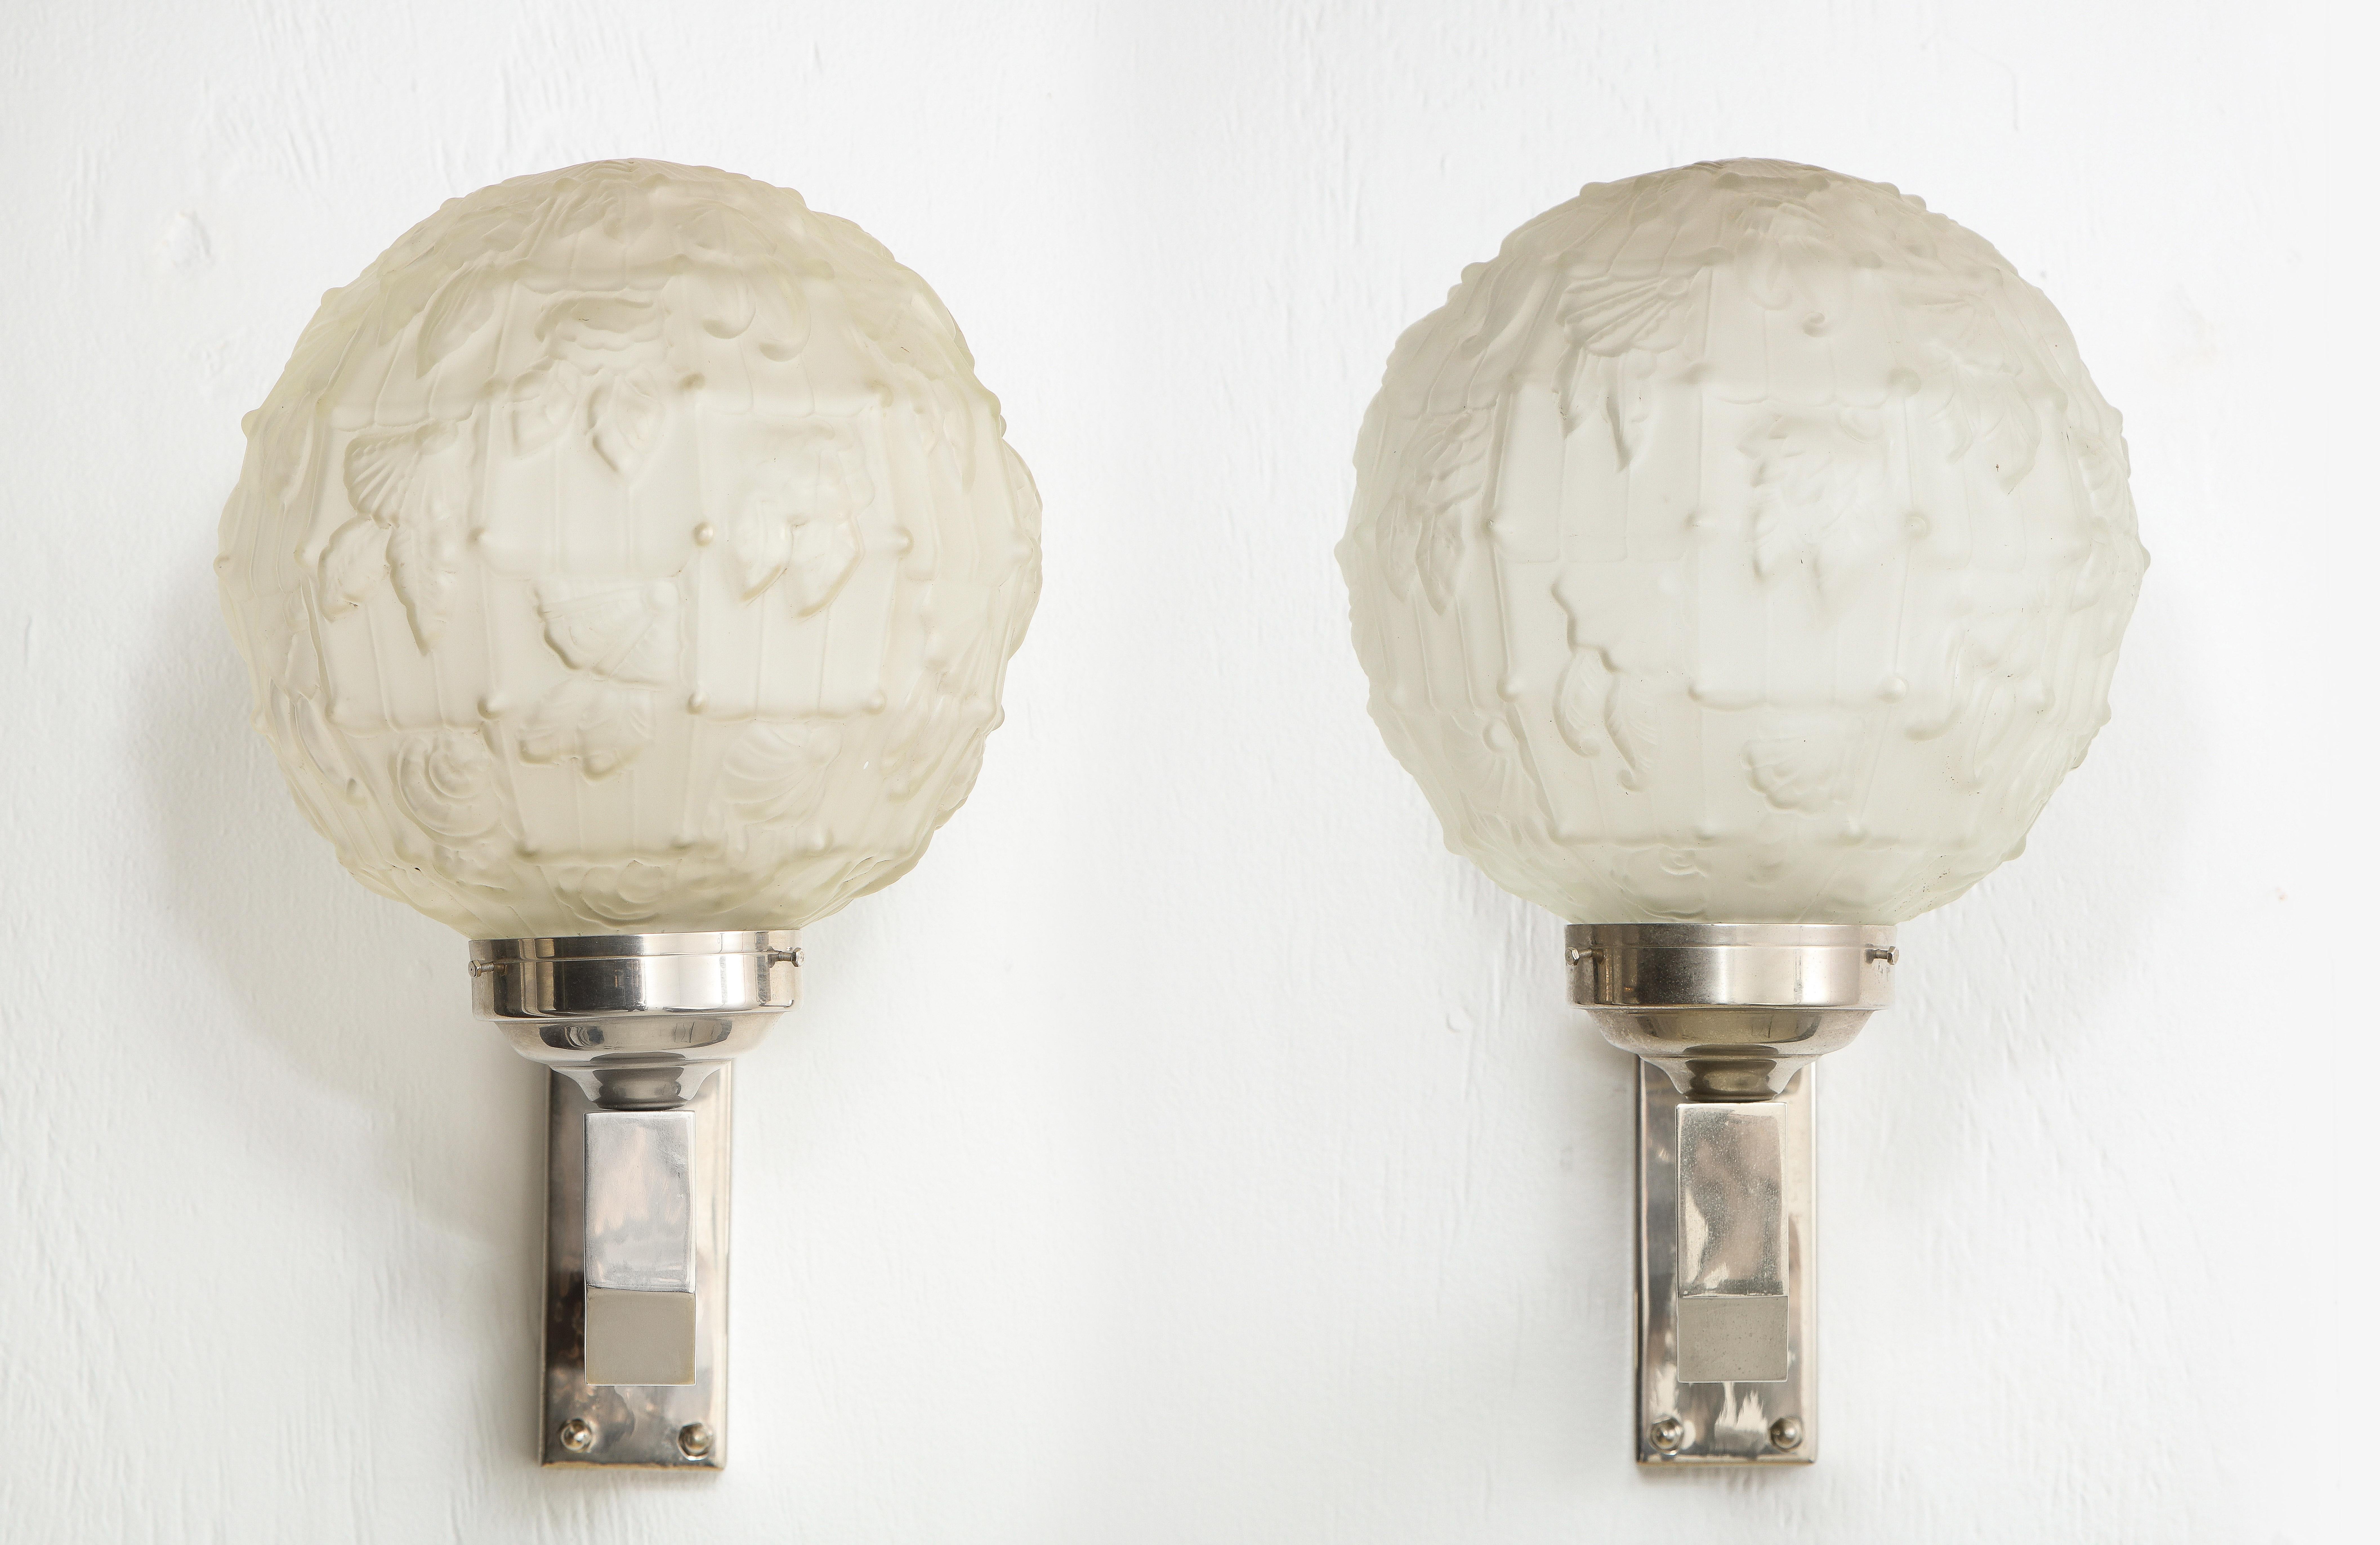 Stunning pair of Art Deco sconces in nickel-plated bronze, the globes are of cast glass and most likely the work of Maison Petitot or Sabino. 2 pairs and a single are available, priced as pairs.